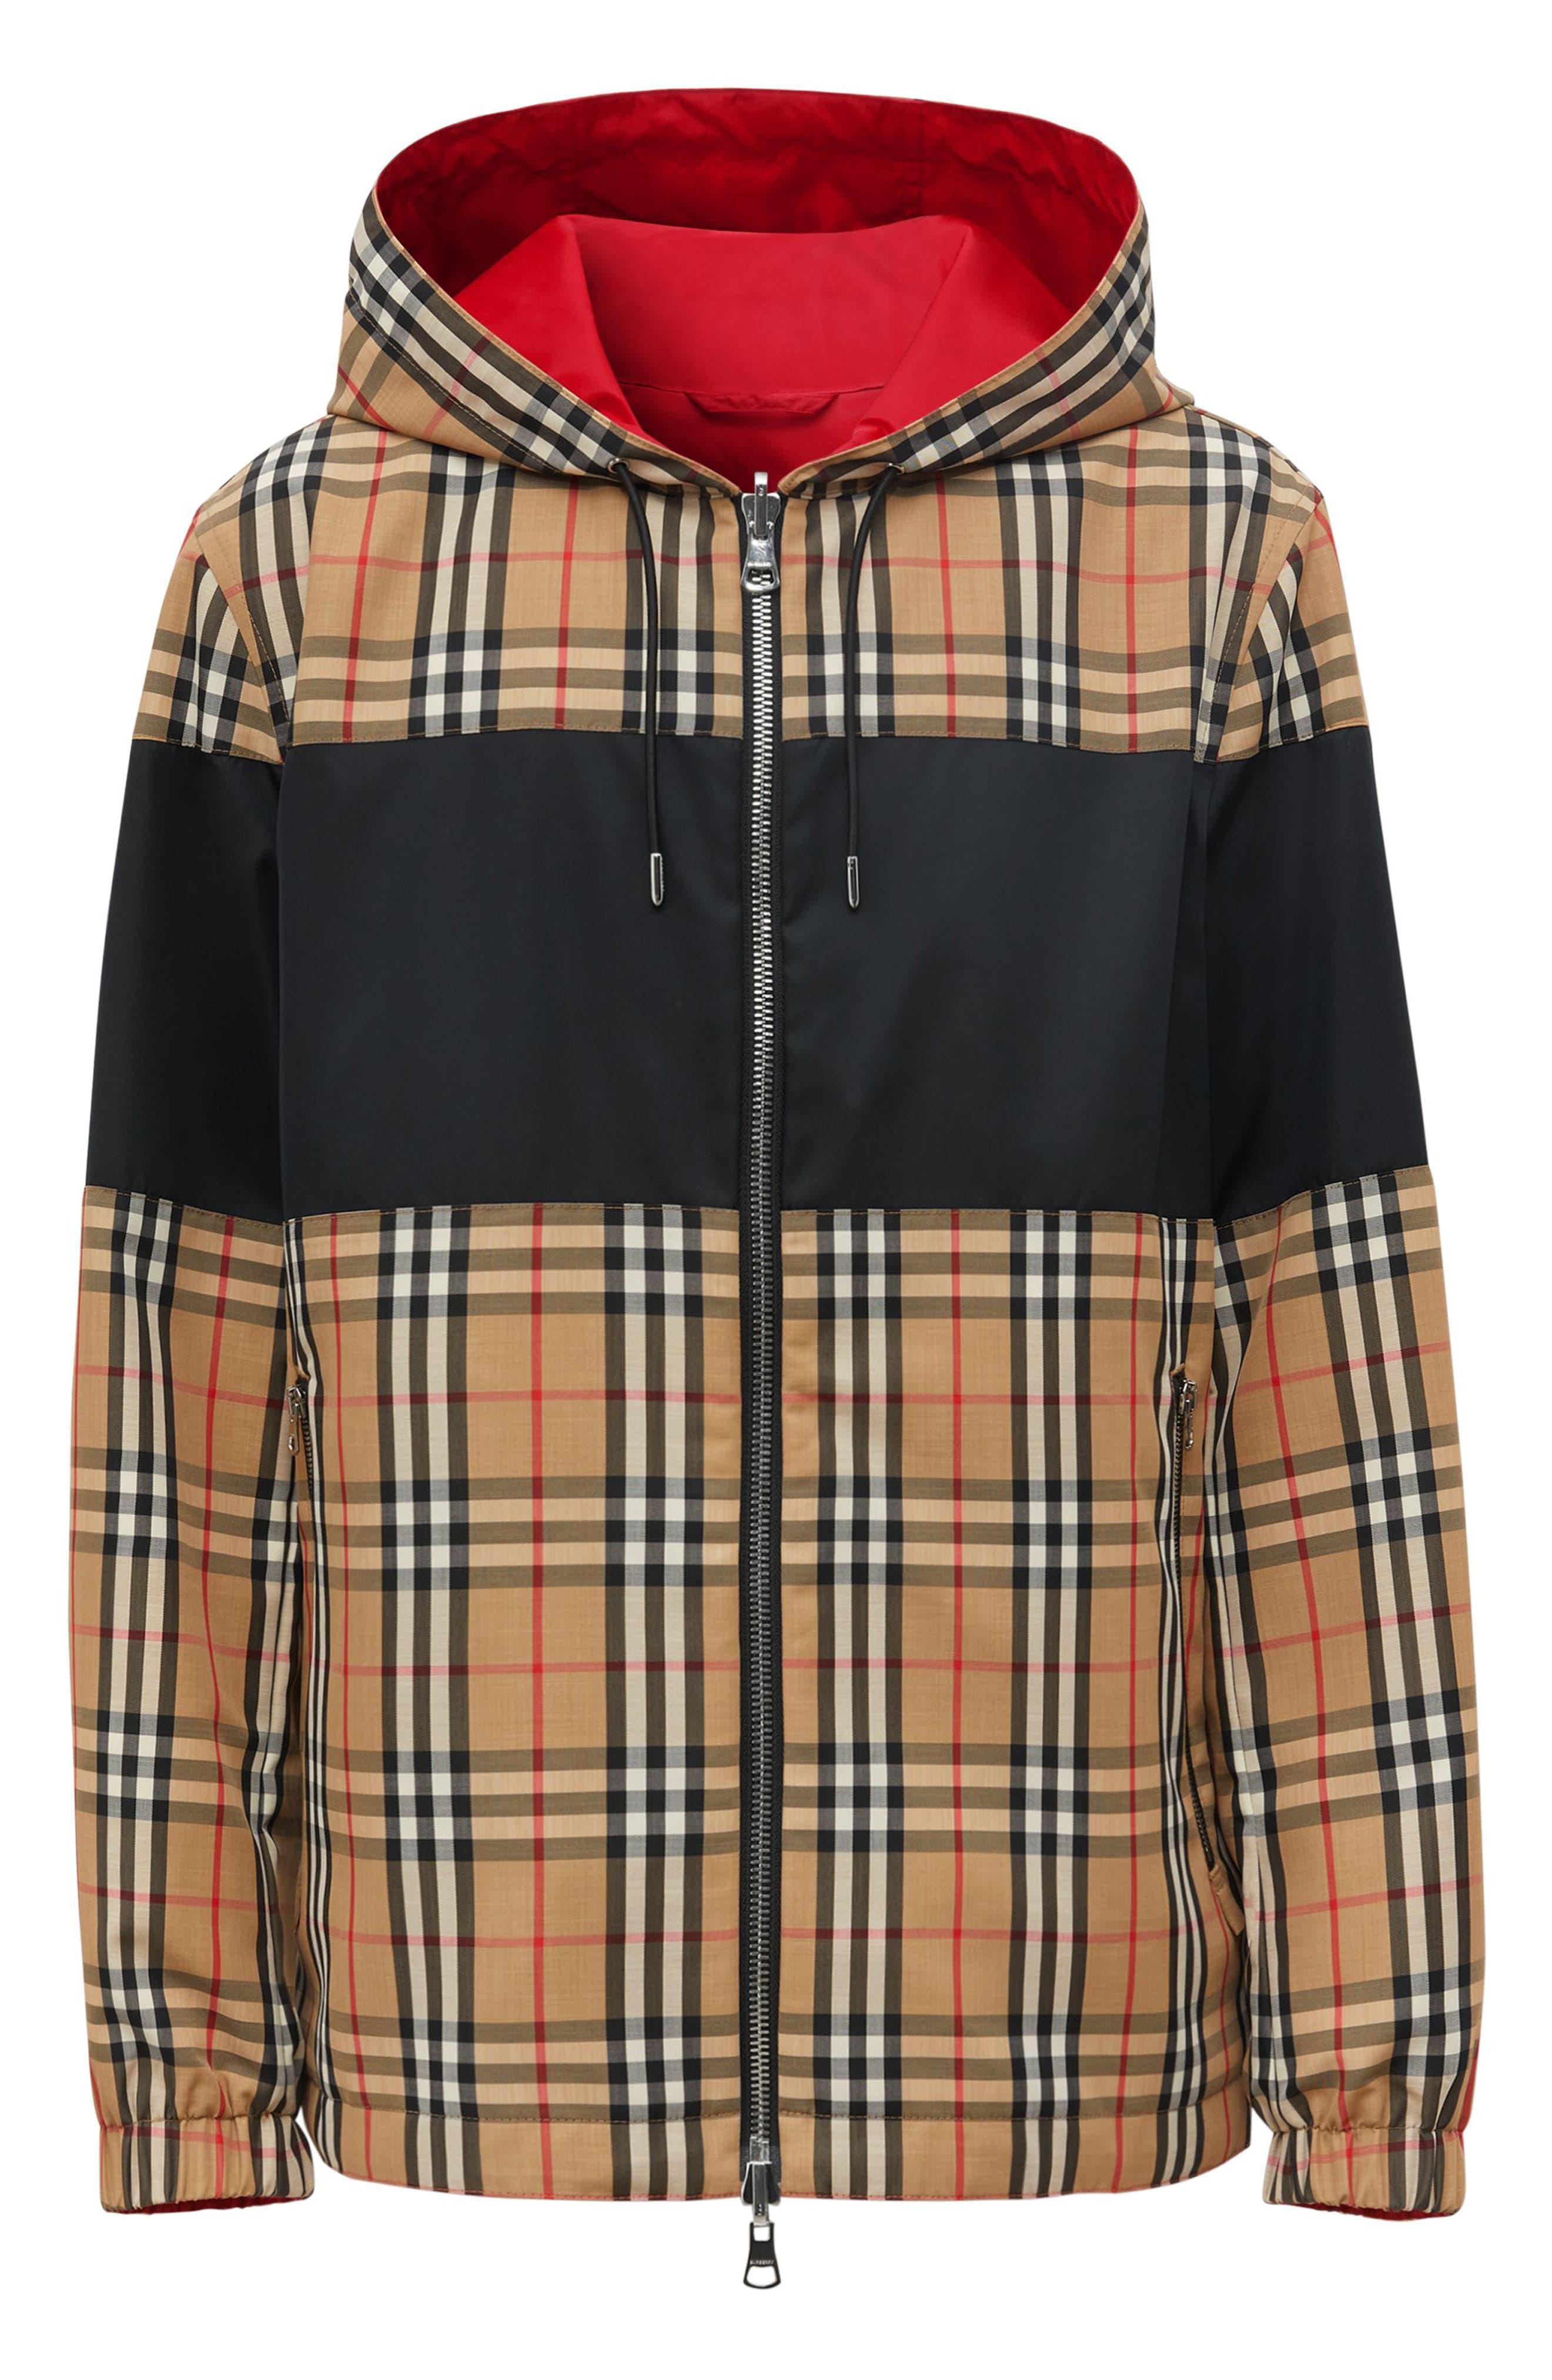 Burberry Synthetic Shropshire Reversible Check Hooded Jacket for Men - Lyst